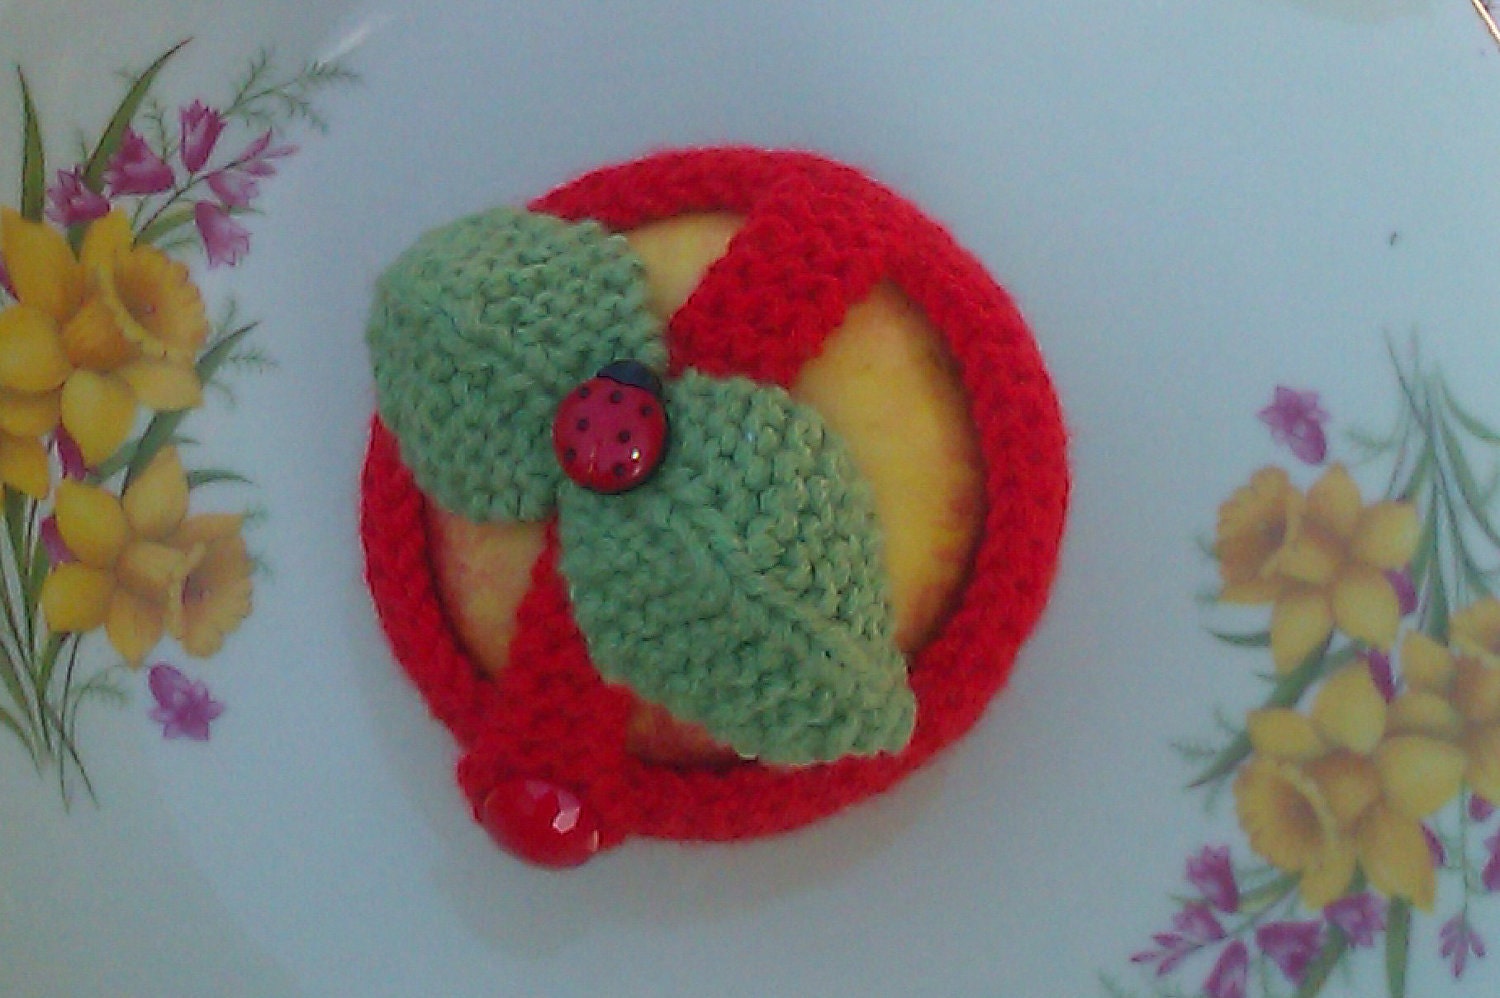 Hand knitted apple cozy.